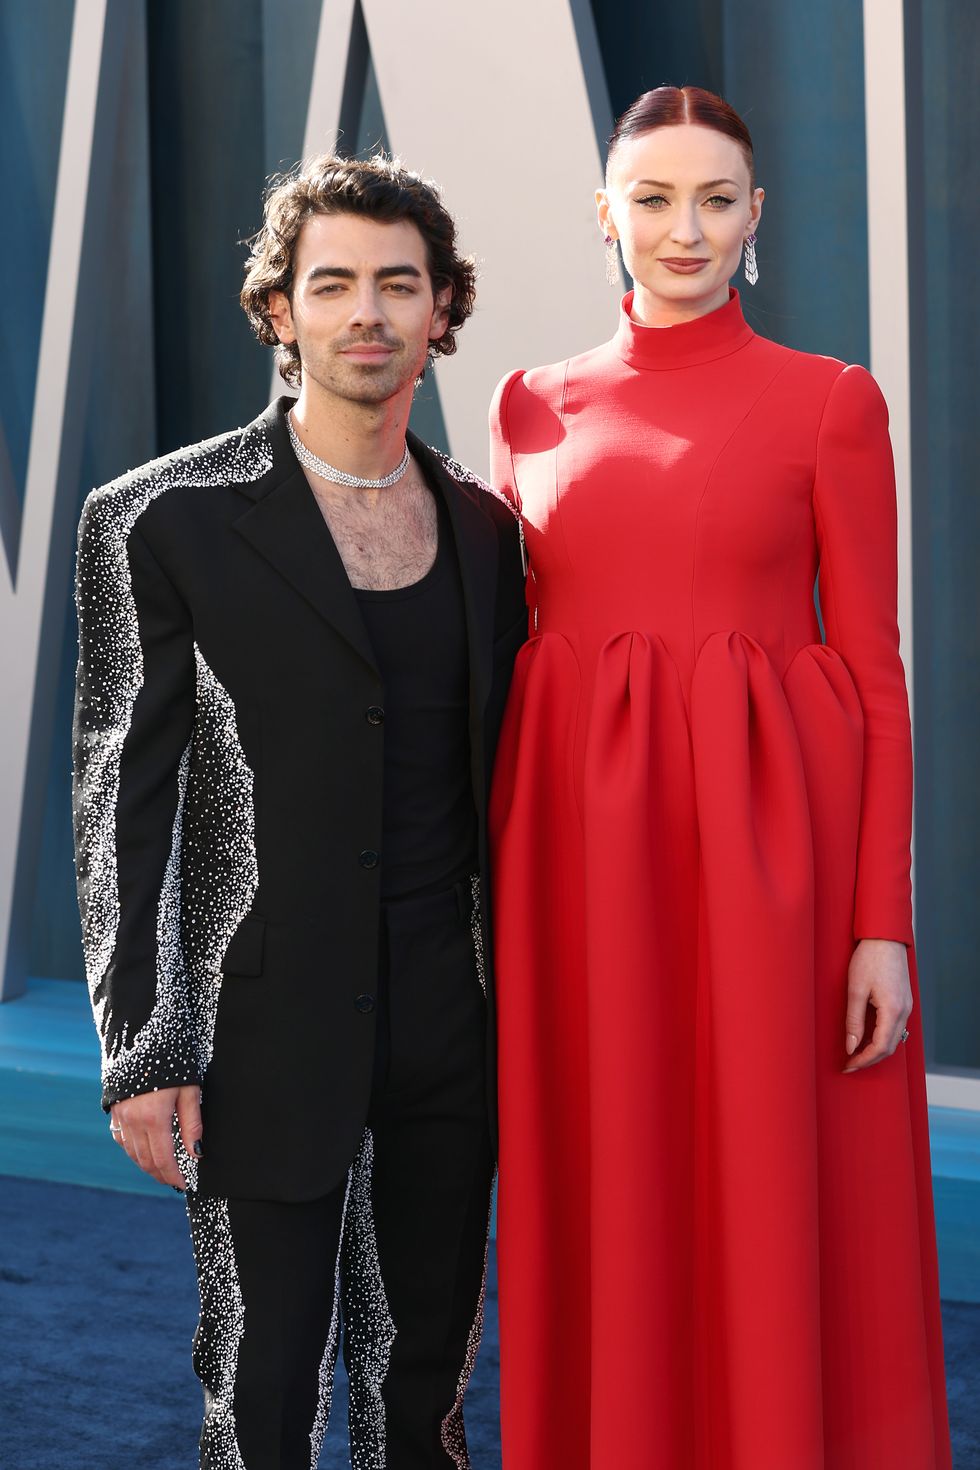 Sophie Turner Shows Off Baby Bump at Oscars Party with Joe Jonas